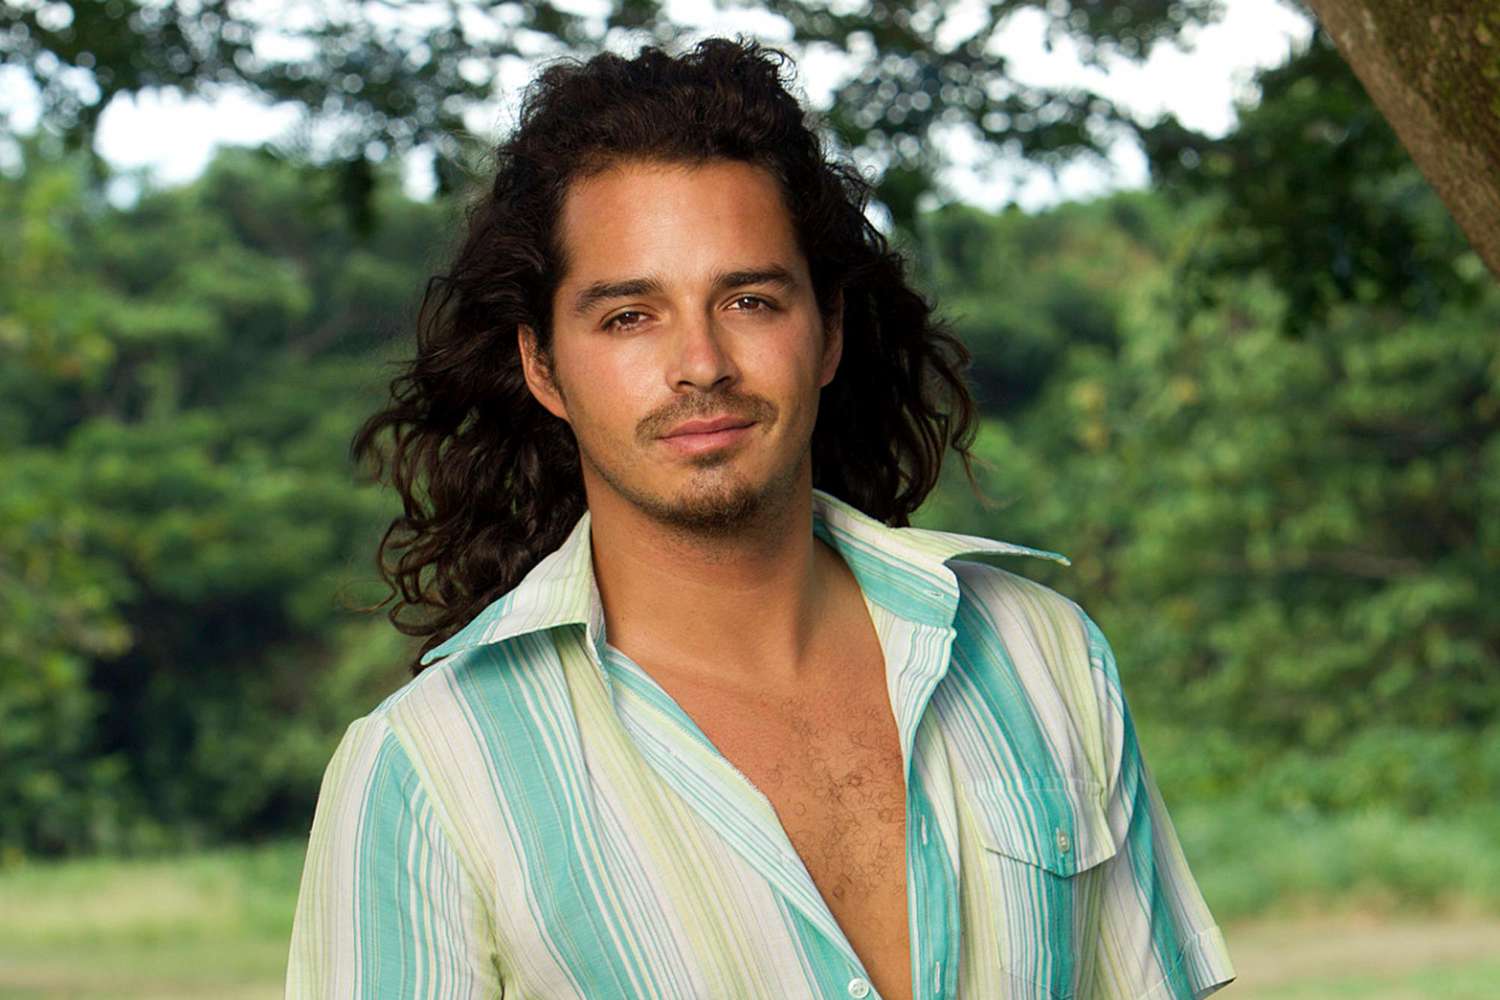 Survivor: Ozzy Lusth sayswas different after playing the game. ew.com. 